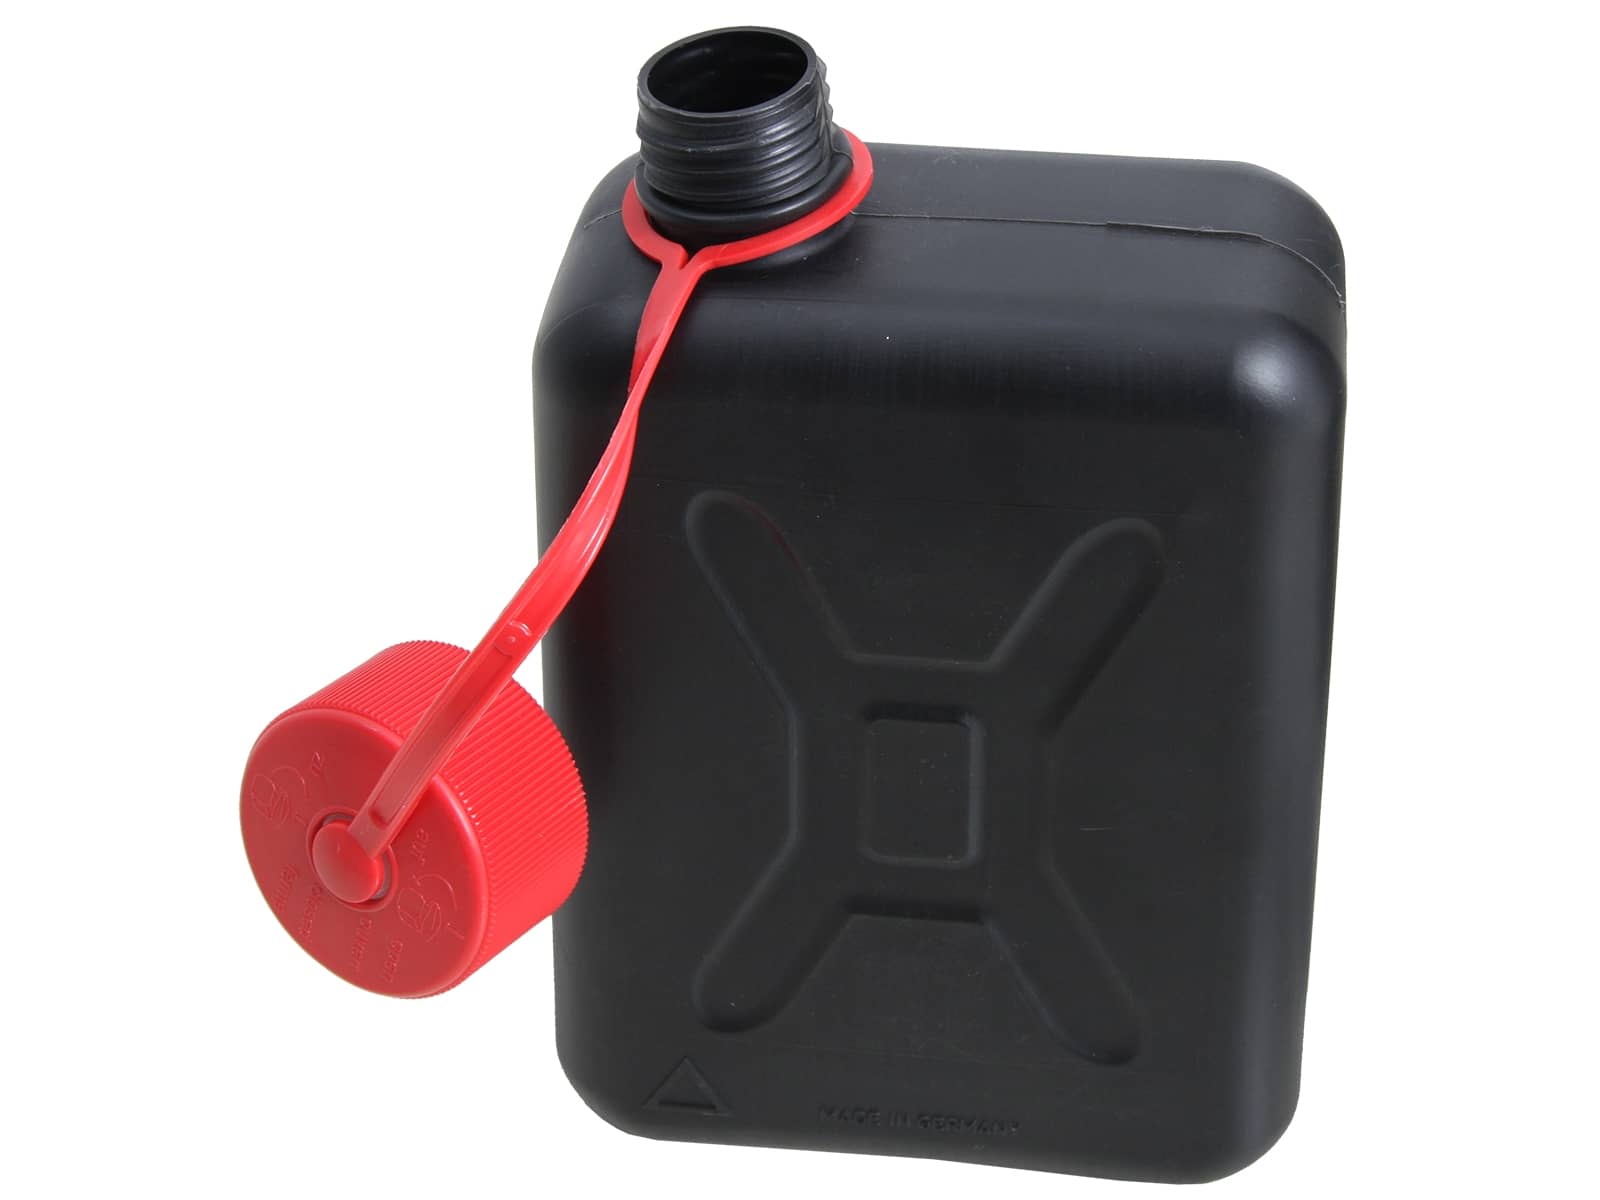 2L Jerry Can with Universal Mount - Fuel/Water, Plastic Canister